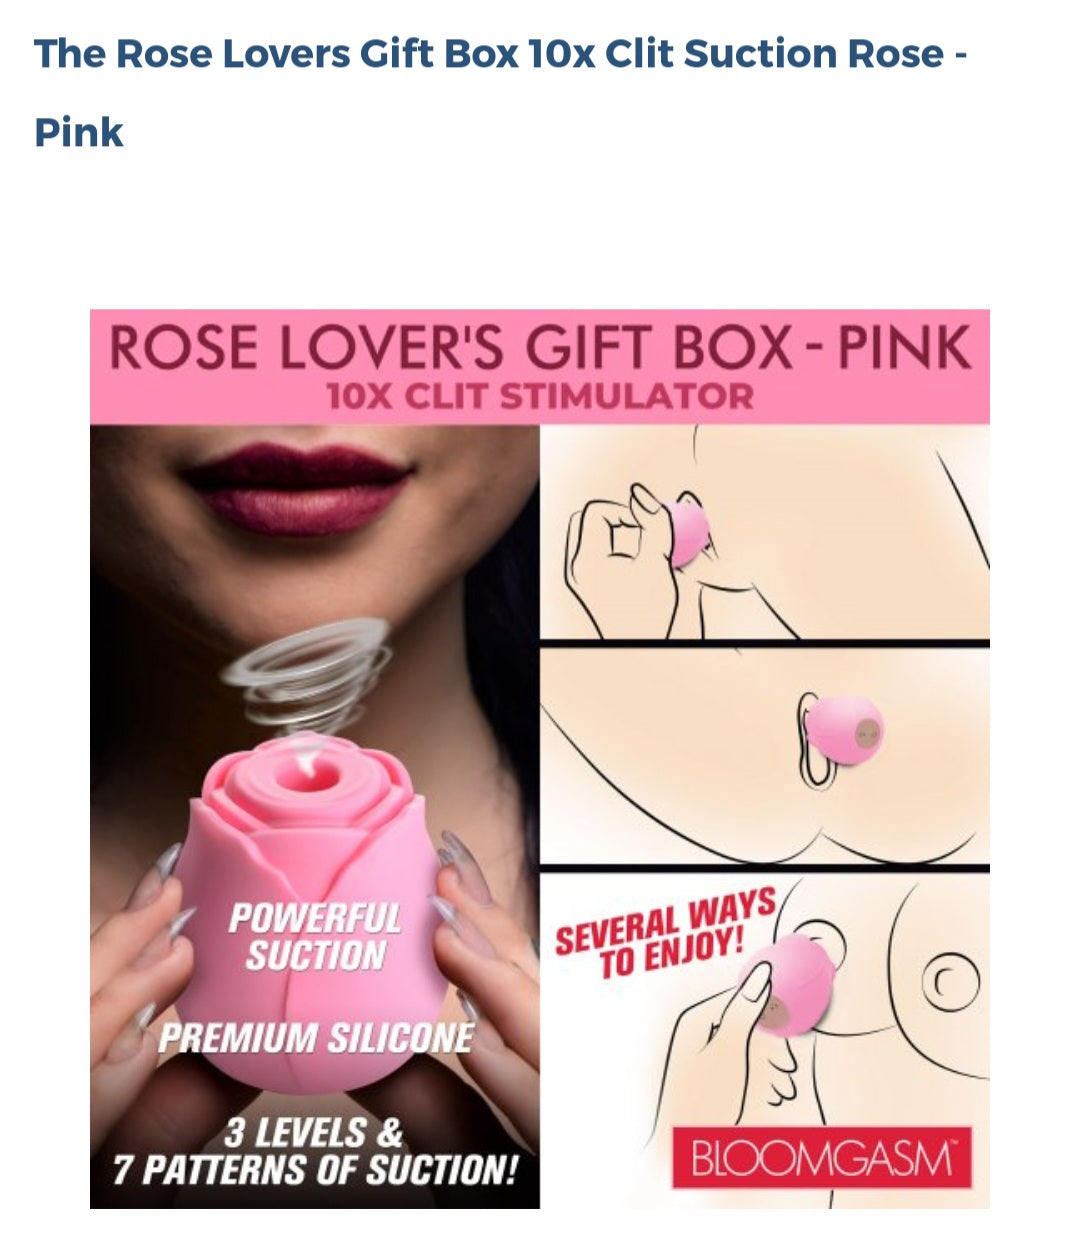 The Rose Lovers Gift Box Clit Suction Rose-Pink